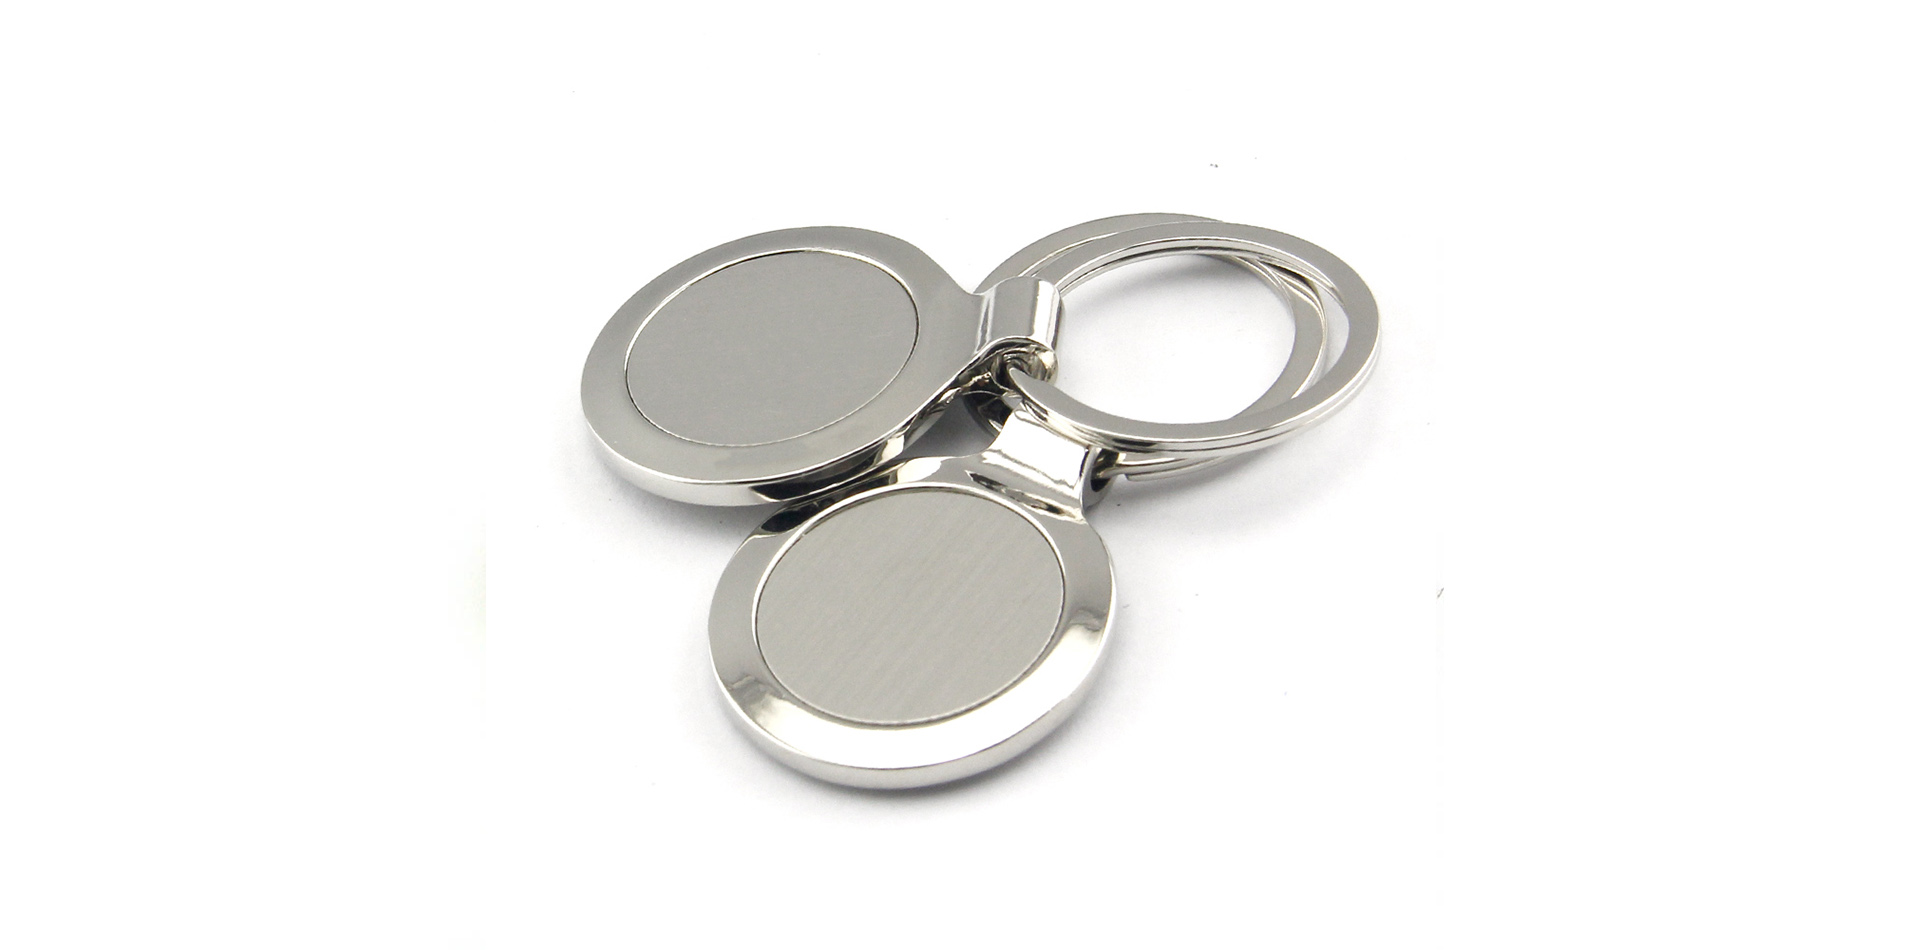 Metal Double Rings Keychain